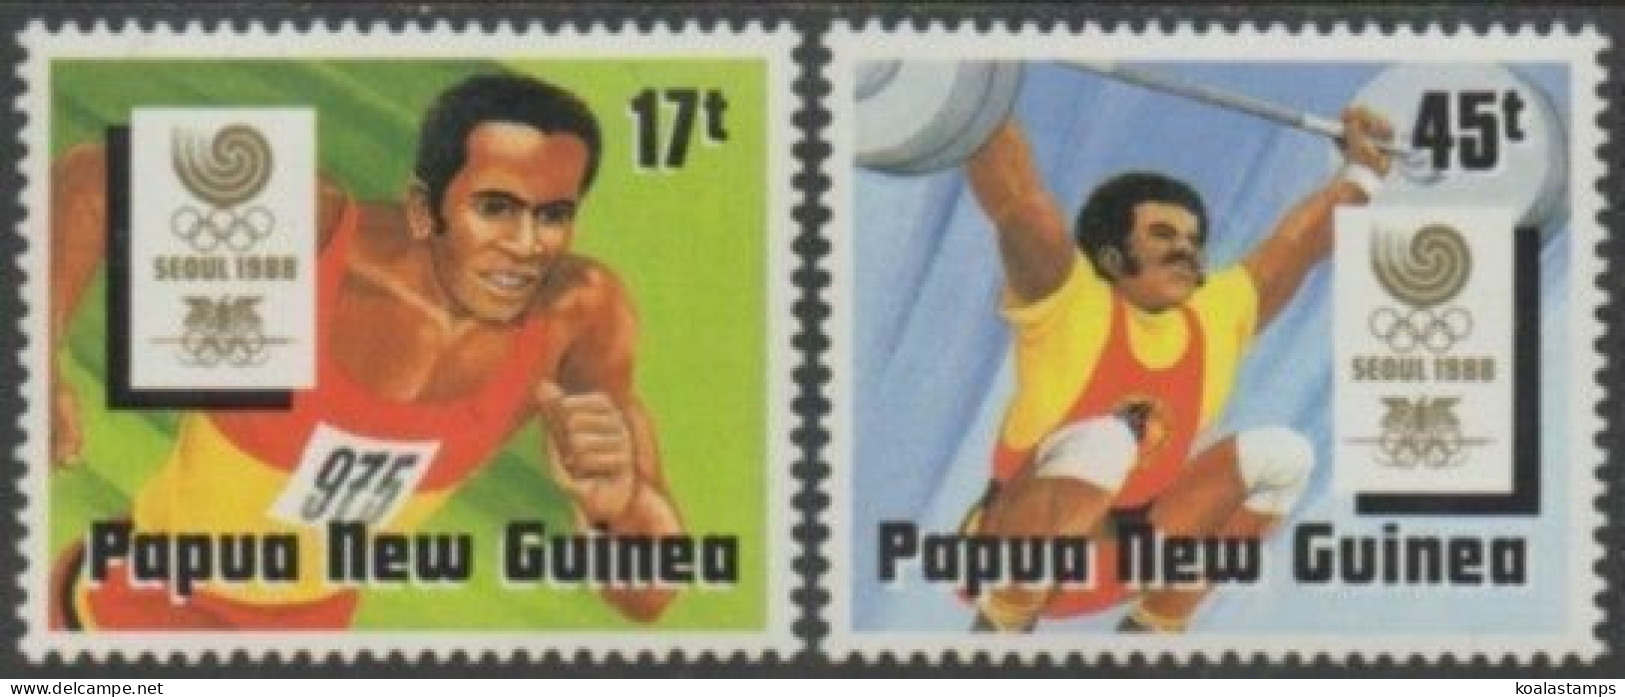 Papua New Guinea 1988 SG583-584 Olympic Games Set MNH - Papouasie-Nouvelle-Guinée